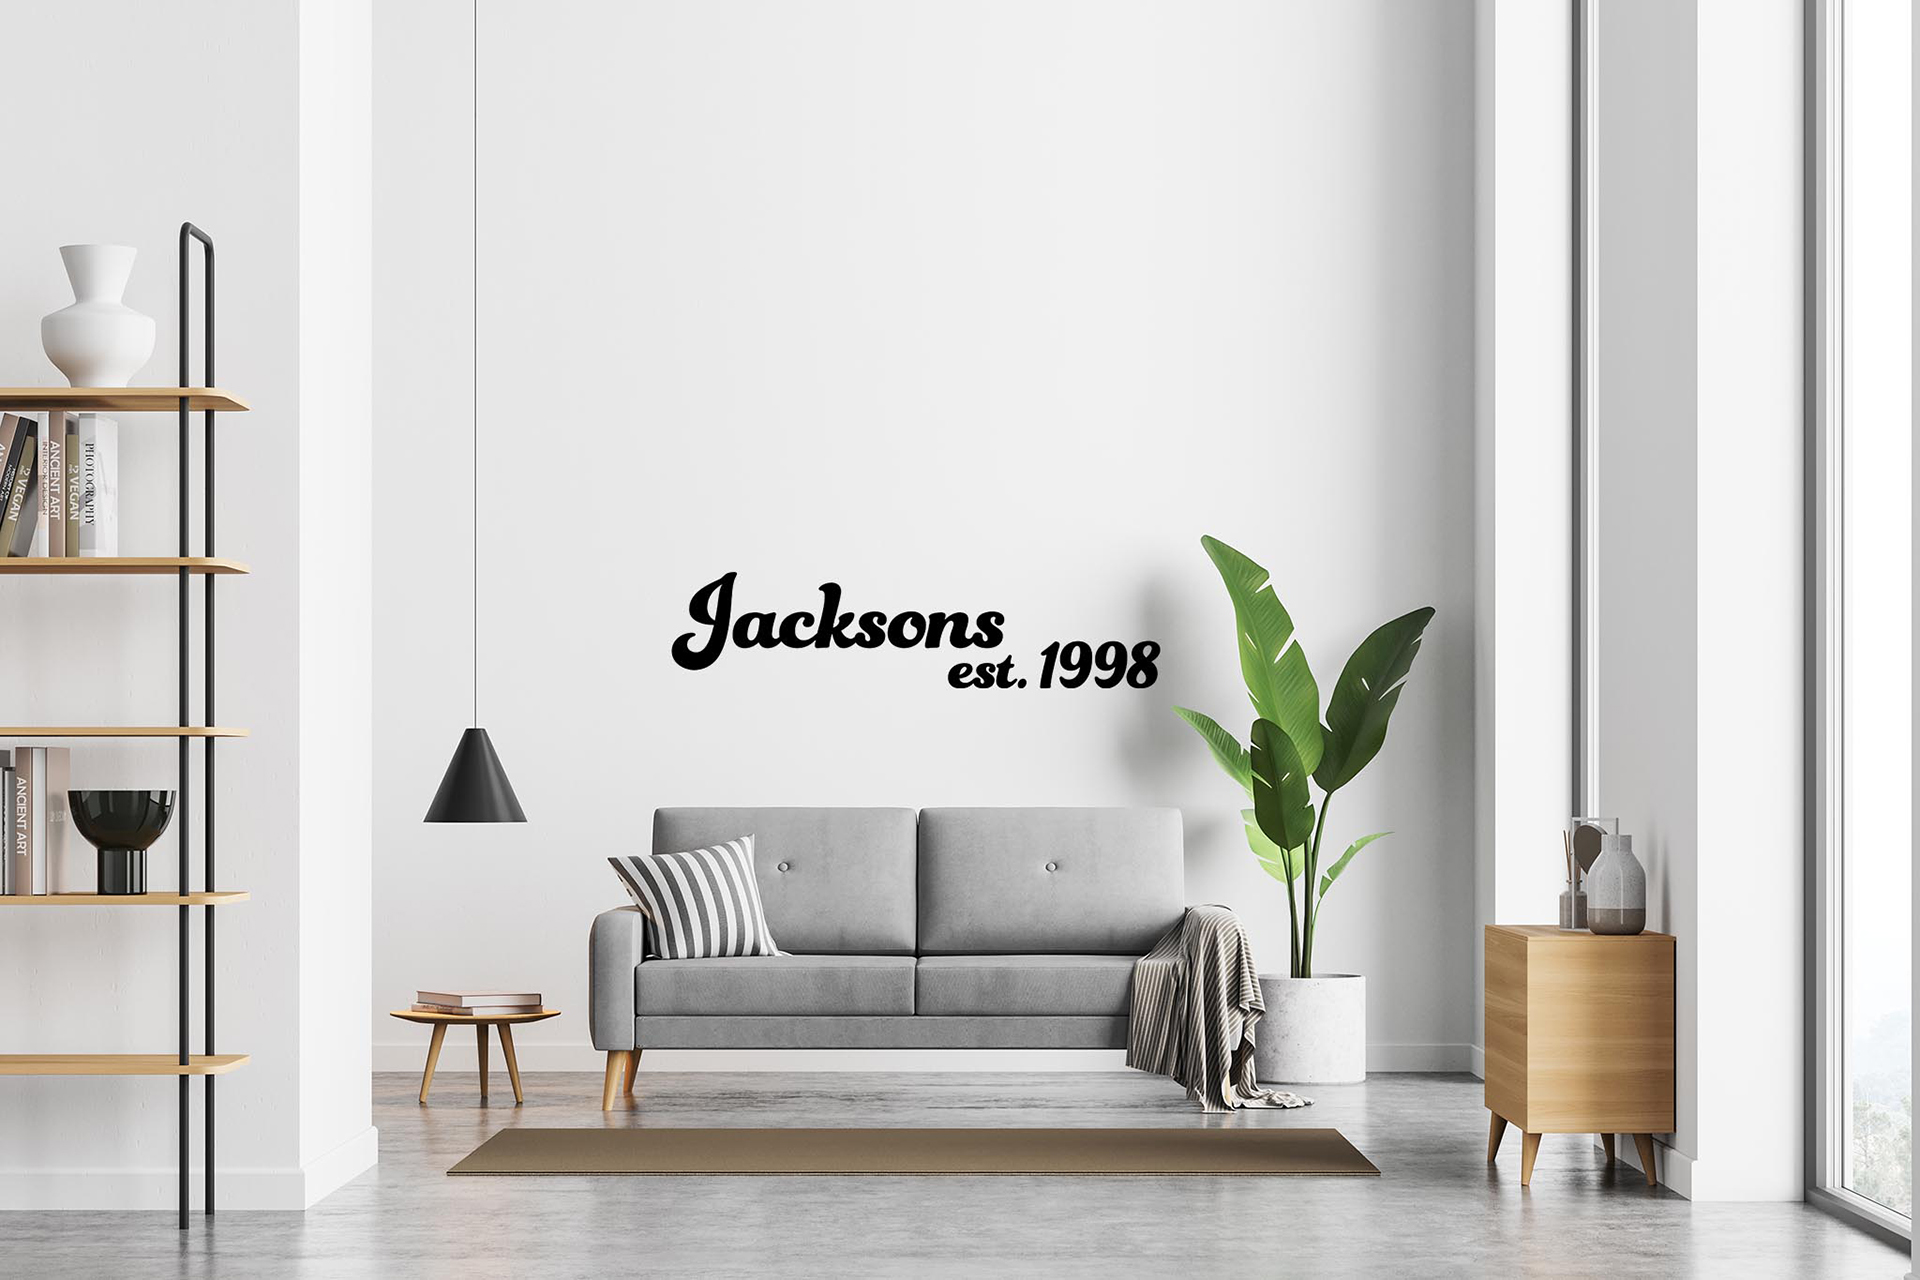 Living room with black Jacksons wall decal using removable vinyl